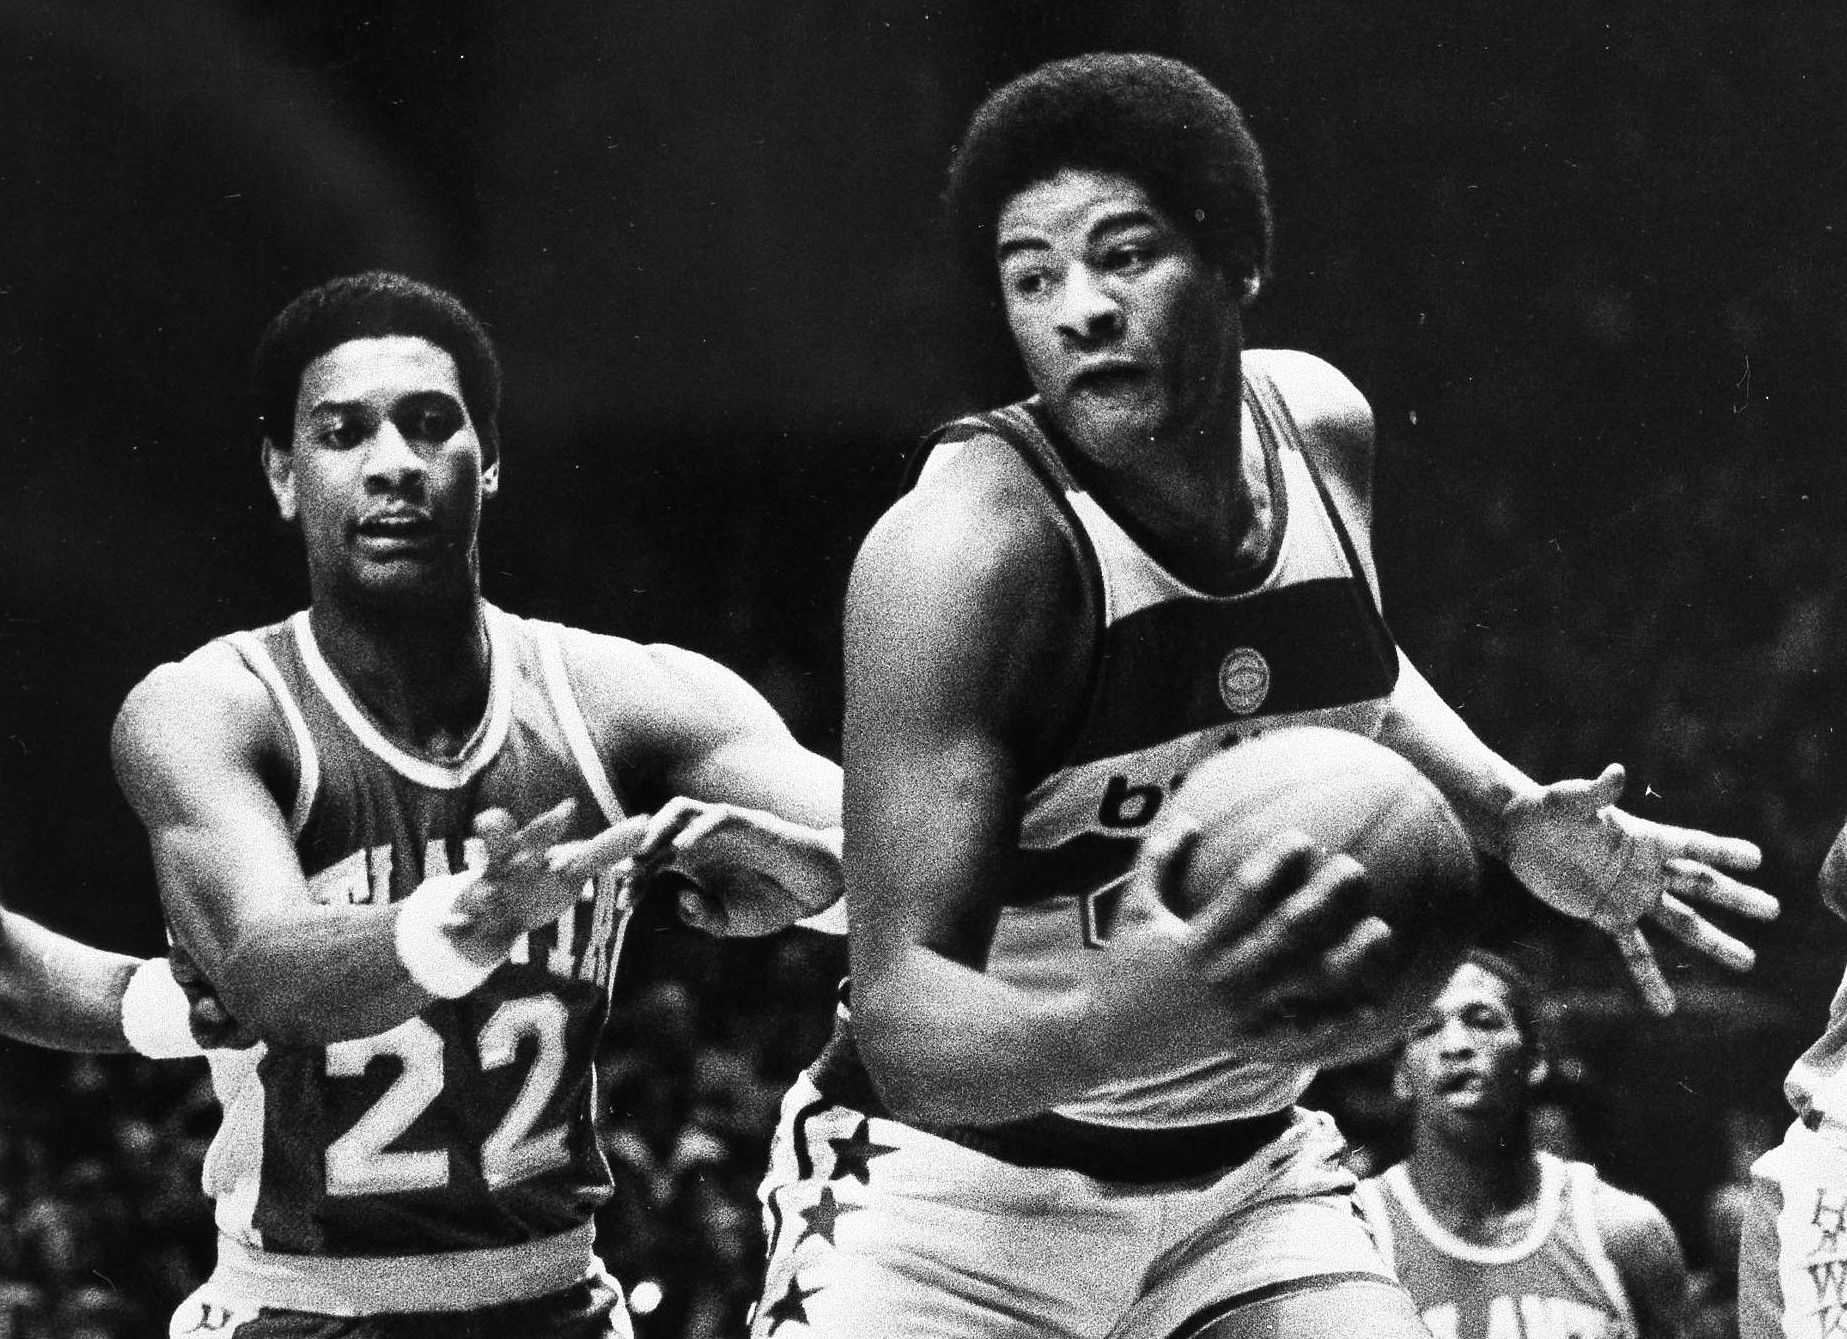 Legacy of UofL legend Wes Unseld remembered by NBC Sports